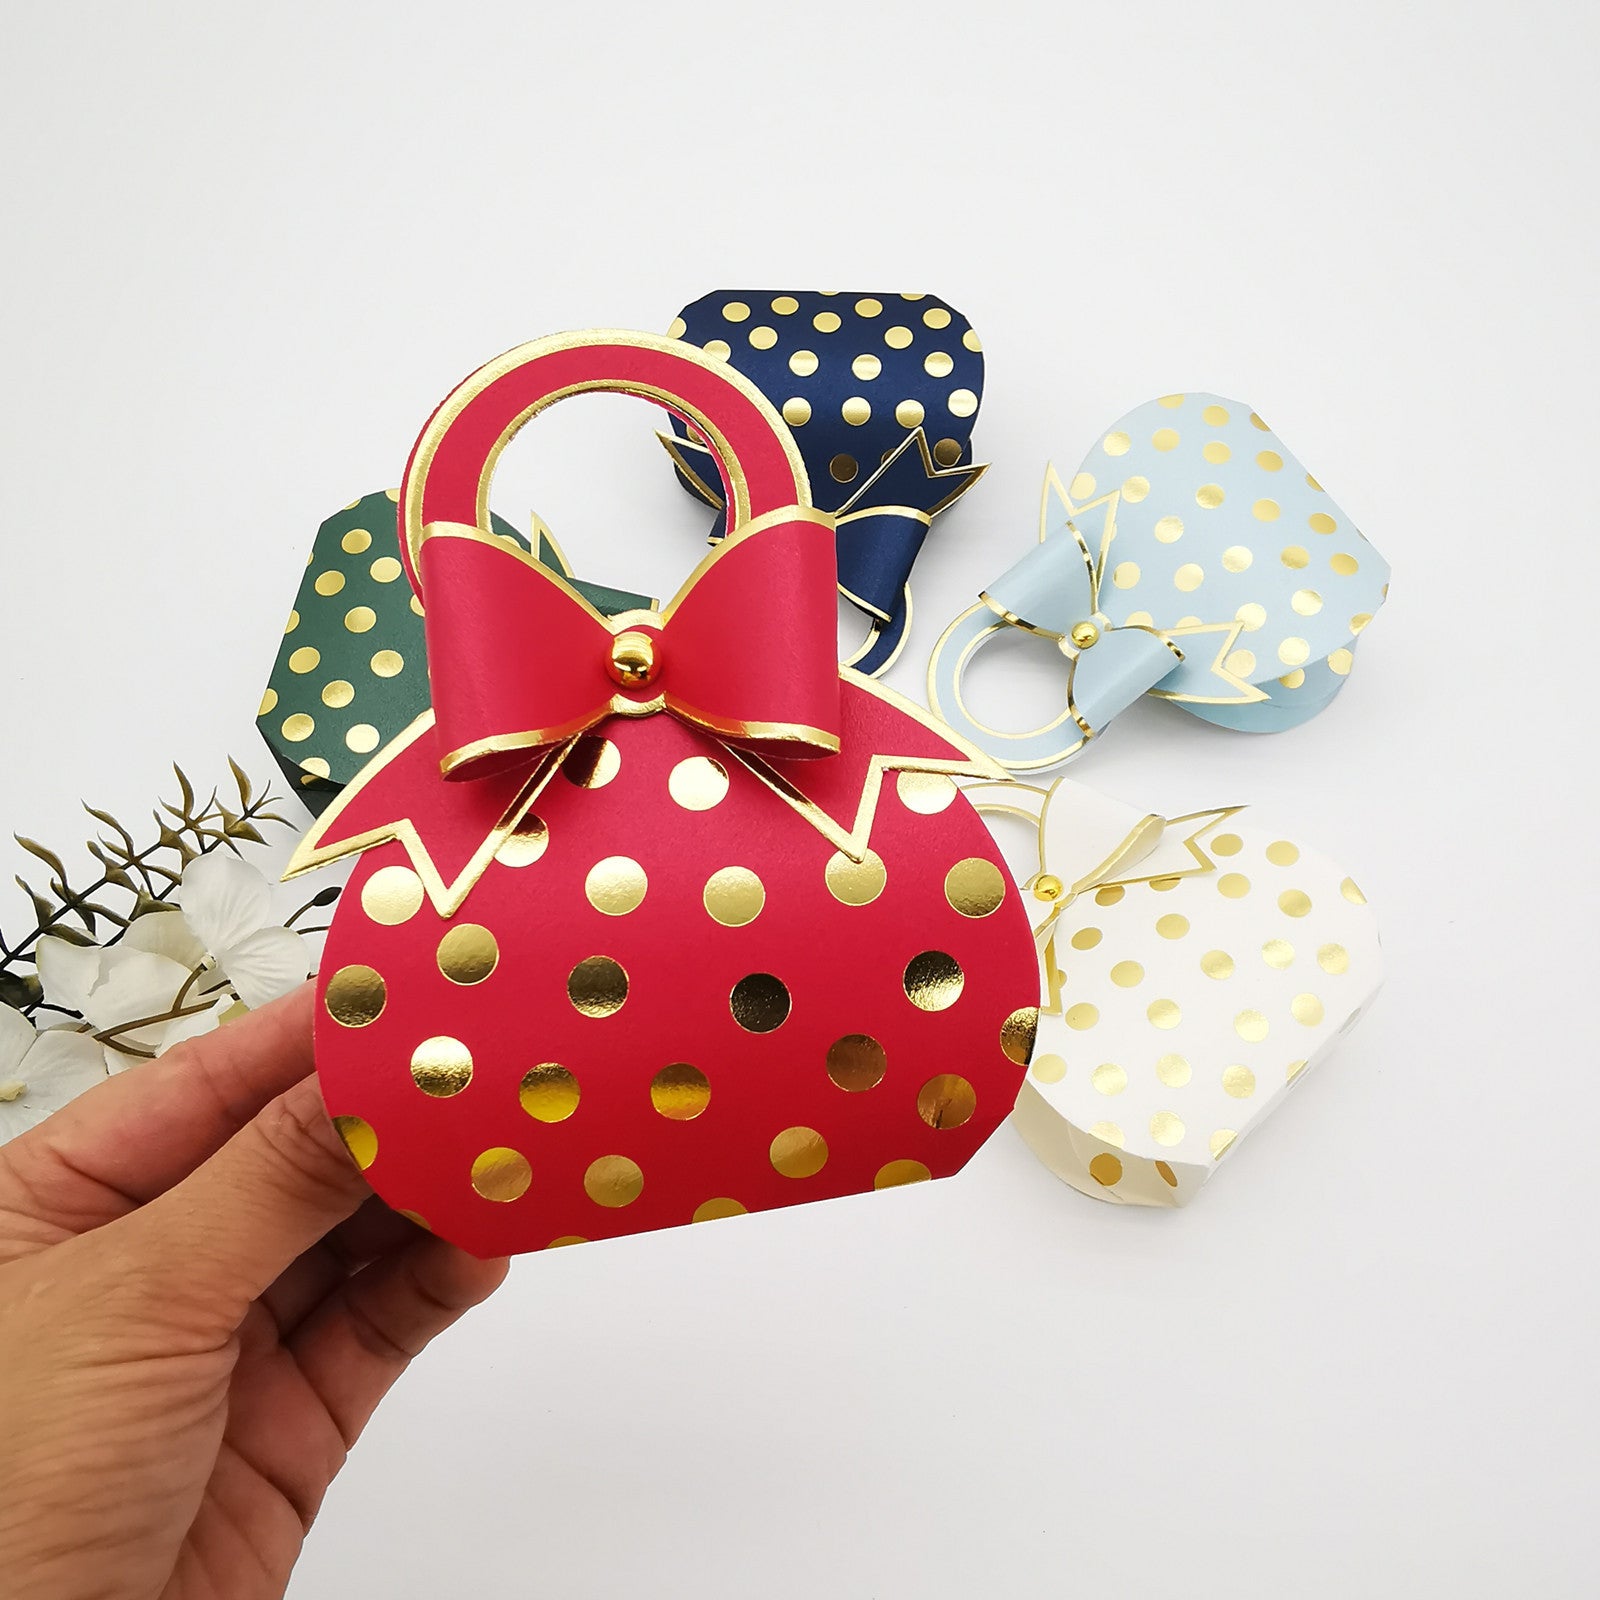 Bulk 50 Pcs Portable Candy Boxes with Polka Dot Foil Stamping Gift Bag with Bow Wholesale